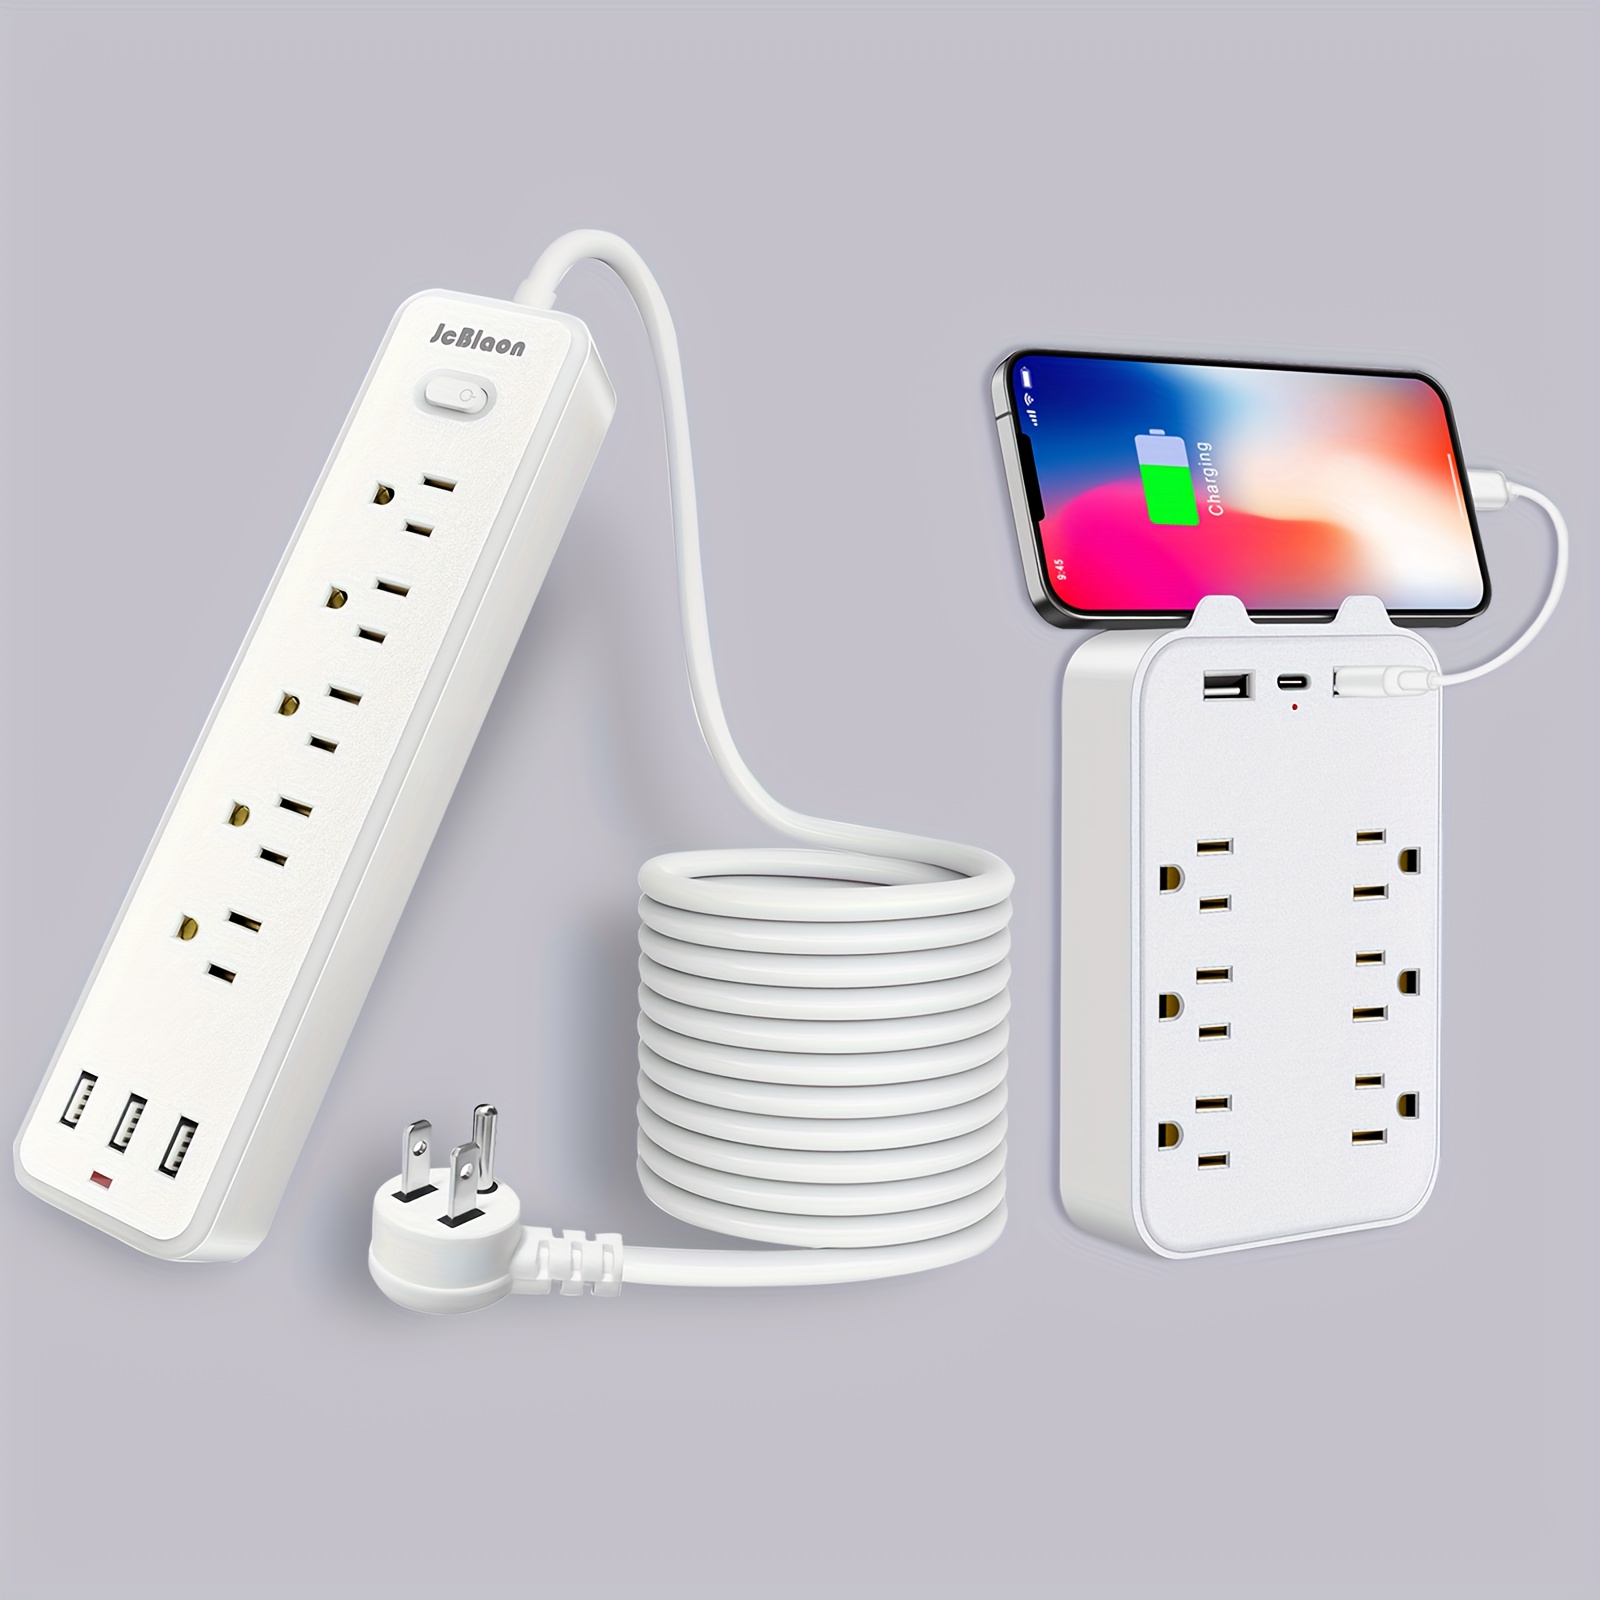 

Surge Protector Power Strip With 6 Outlets 3 Usb Ports Flat Plug Wall Mount For Home Office